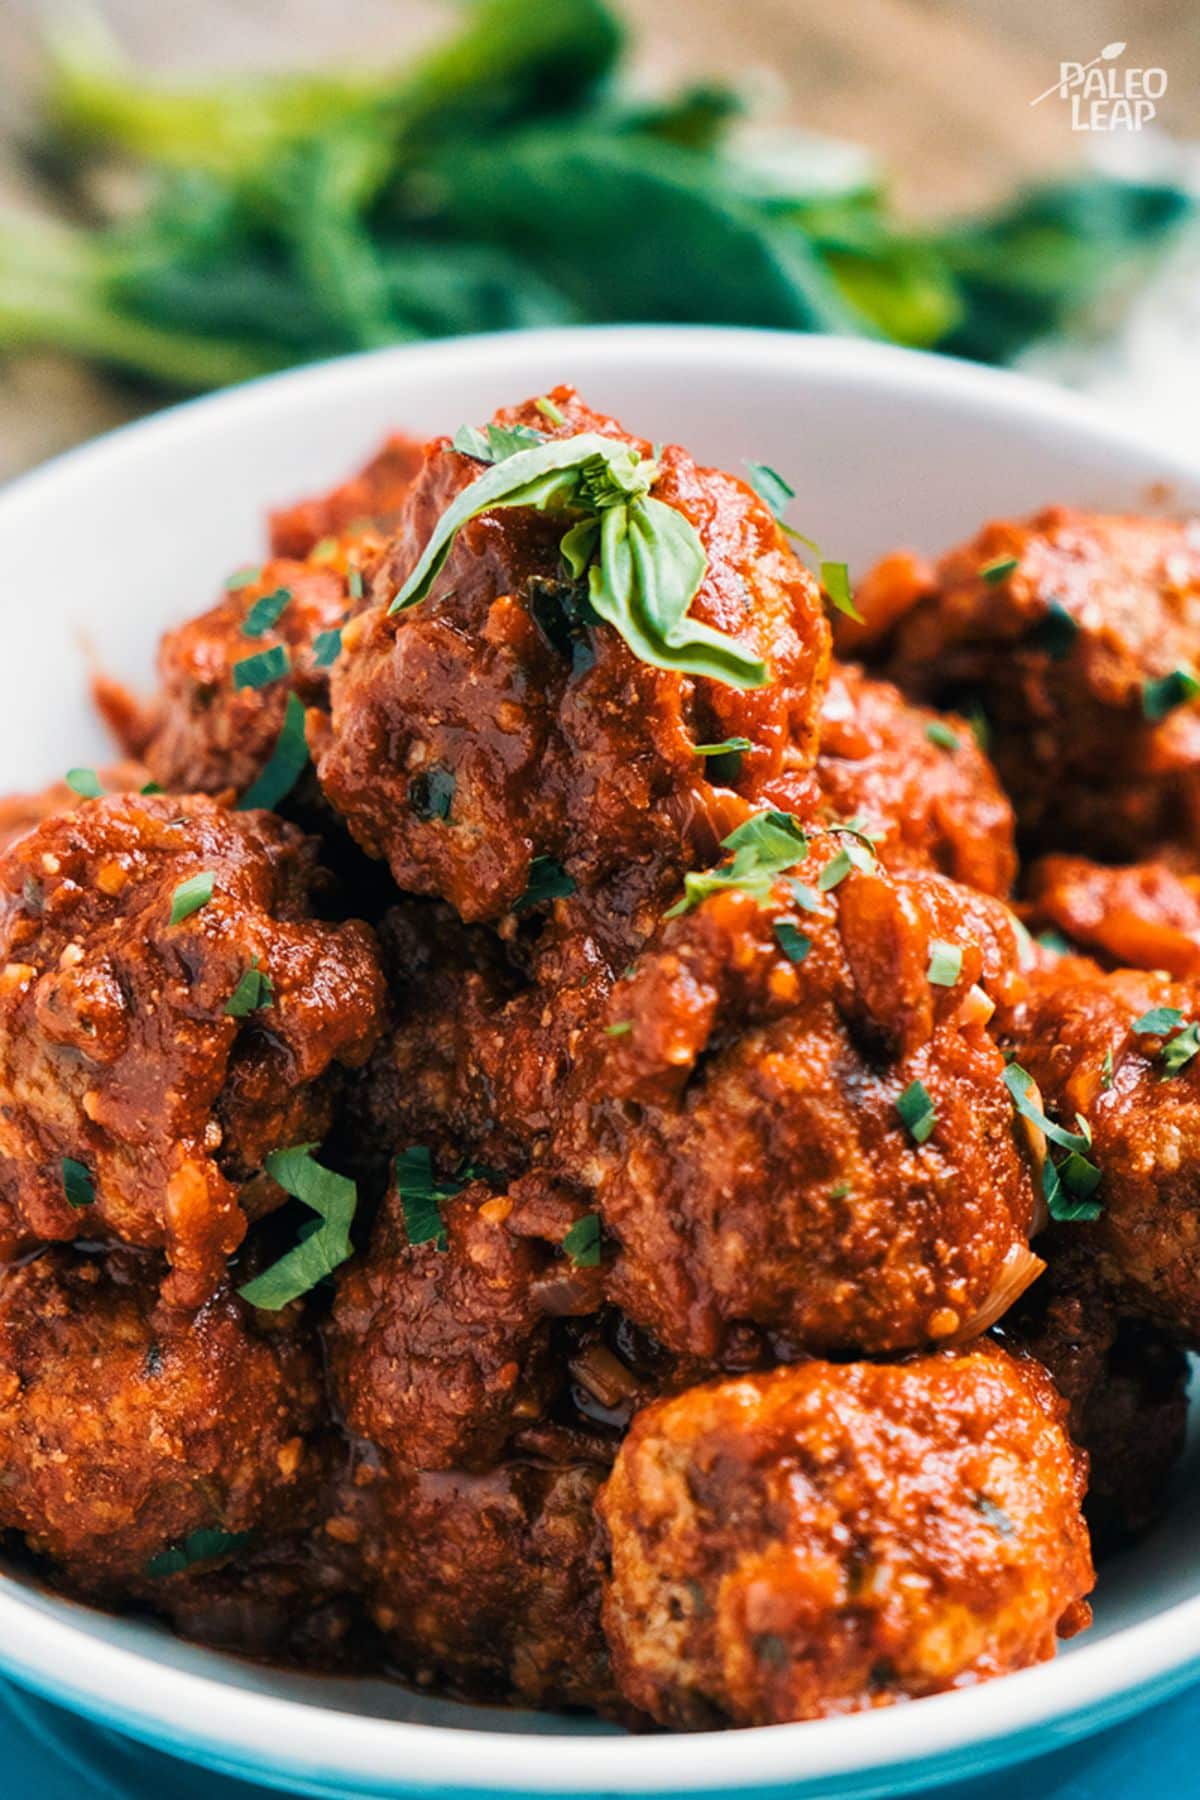 Meatballs With Marinara Sauce in a bowl.